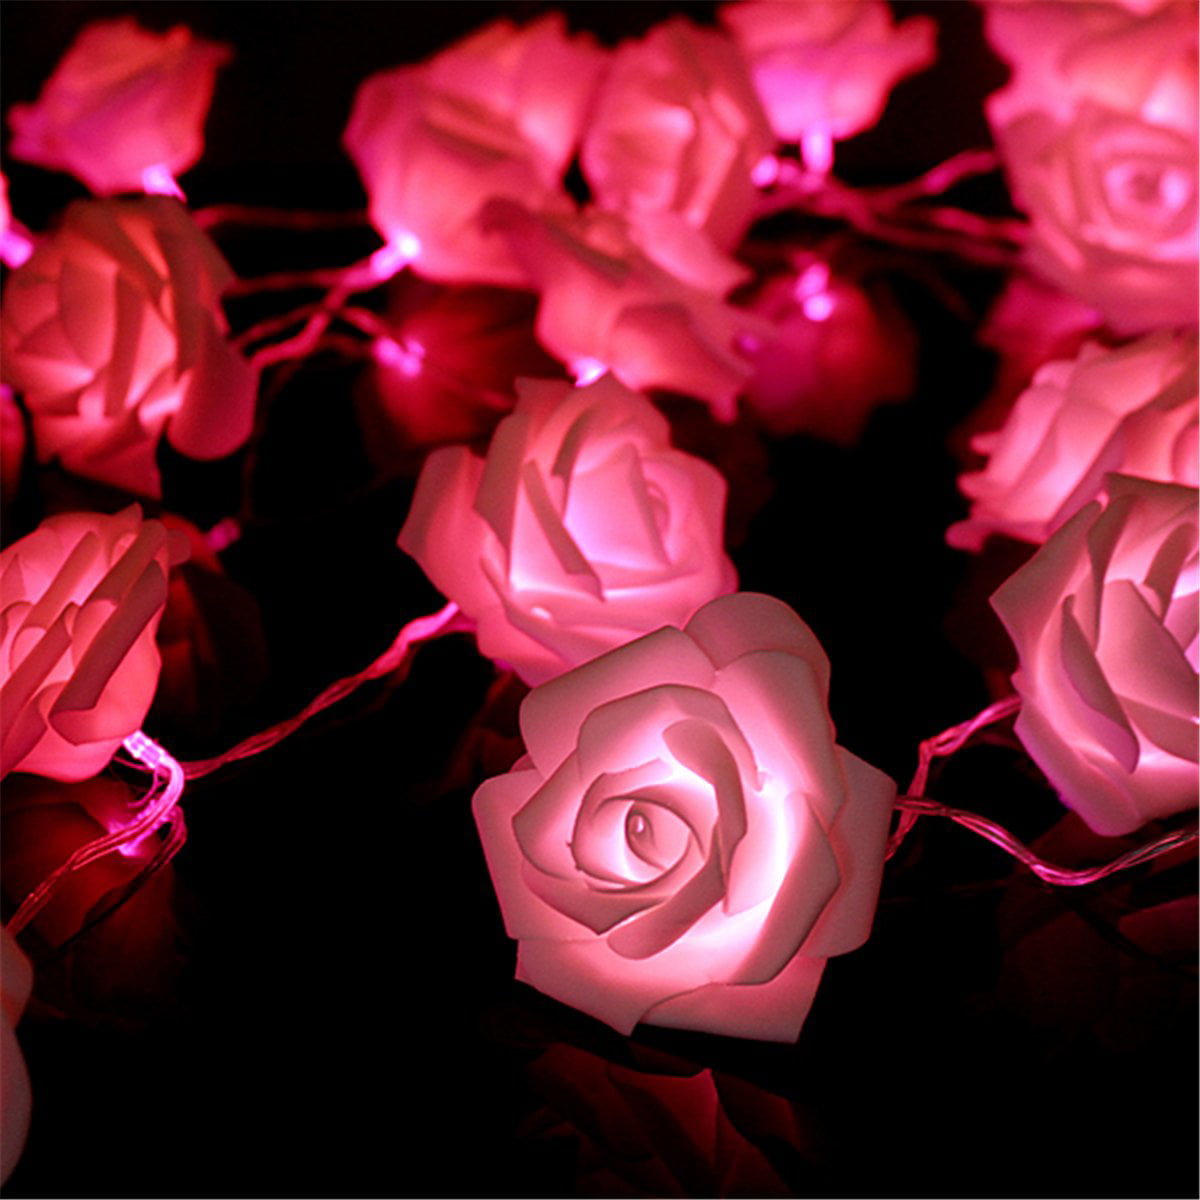 Details about   1x LED Christmas Decor Rose Flower Fairy Wedding Garden Party String Lights 